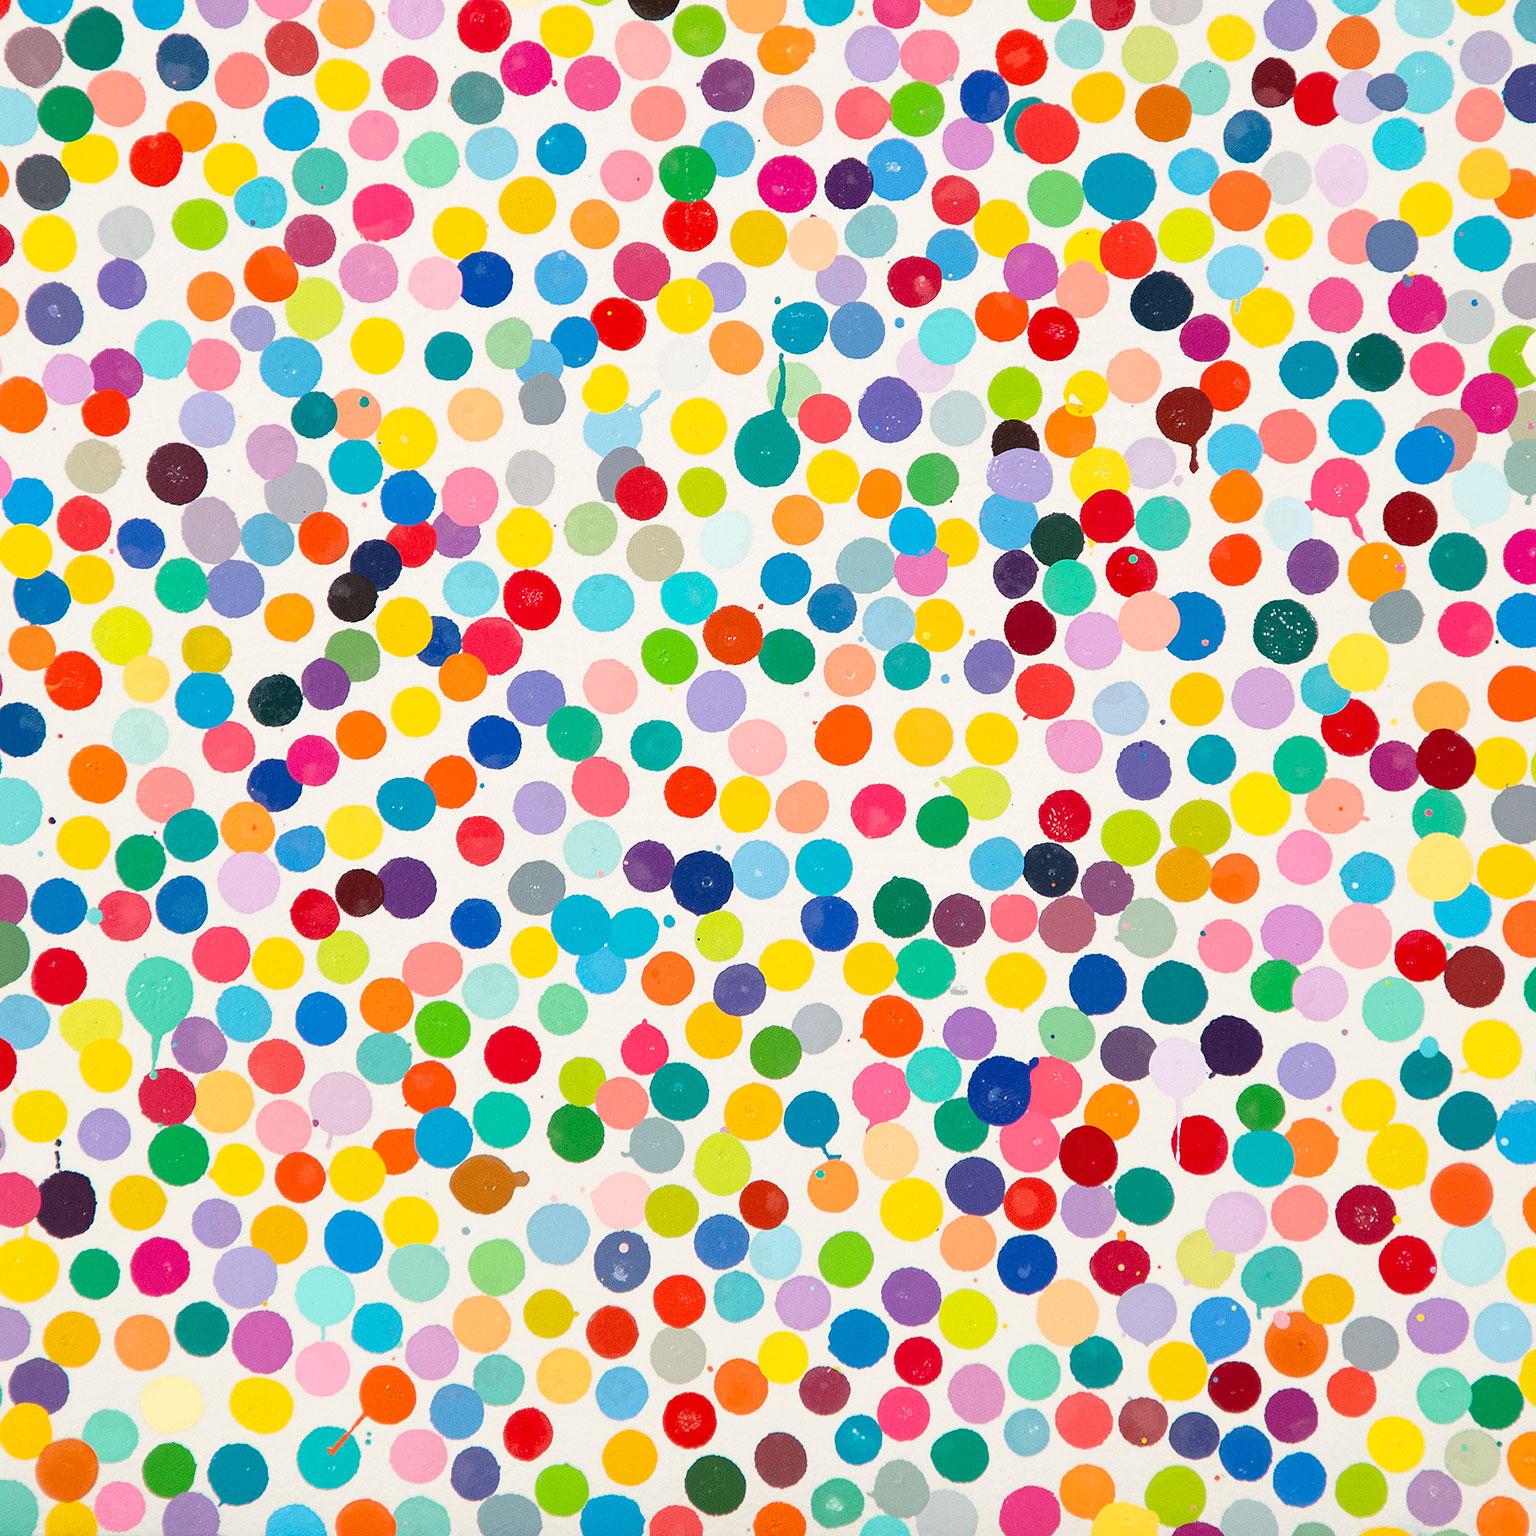 Damien Hirst is arguably the most successful living British artist. He established his reputation, as both an artist and curator, in the 1990s with a new generation of creators knowns as the YBAs (Young British Artists). 

Since the late 1980s,